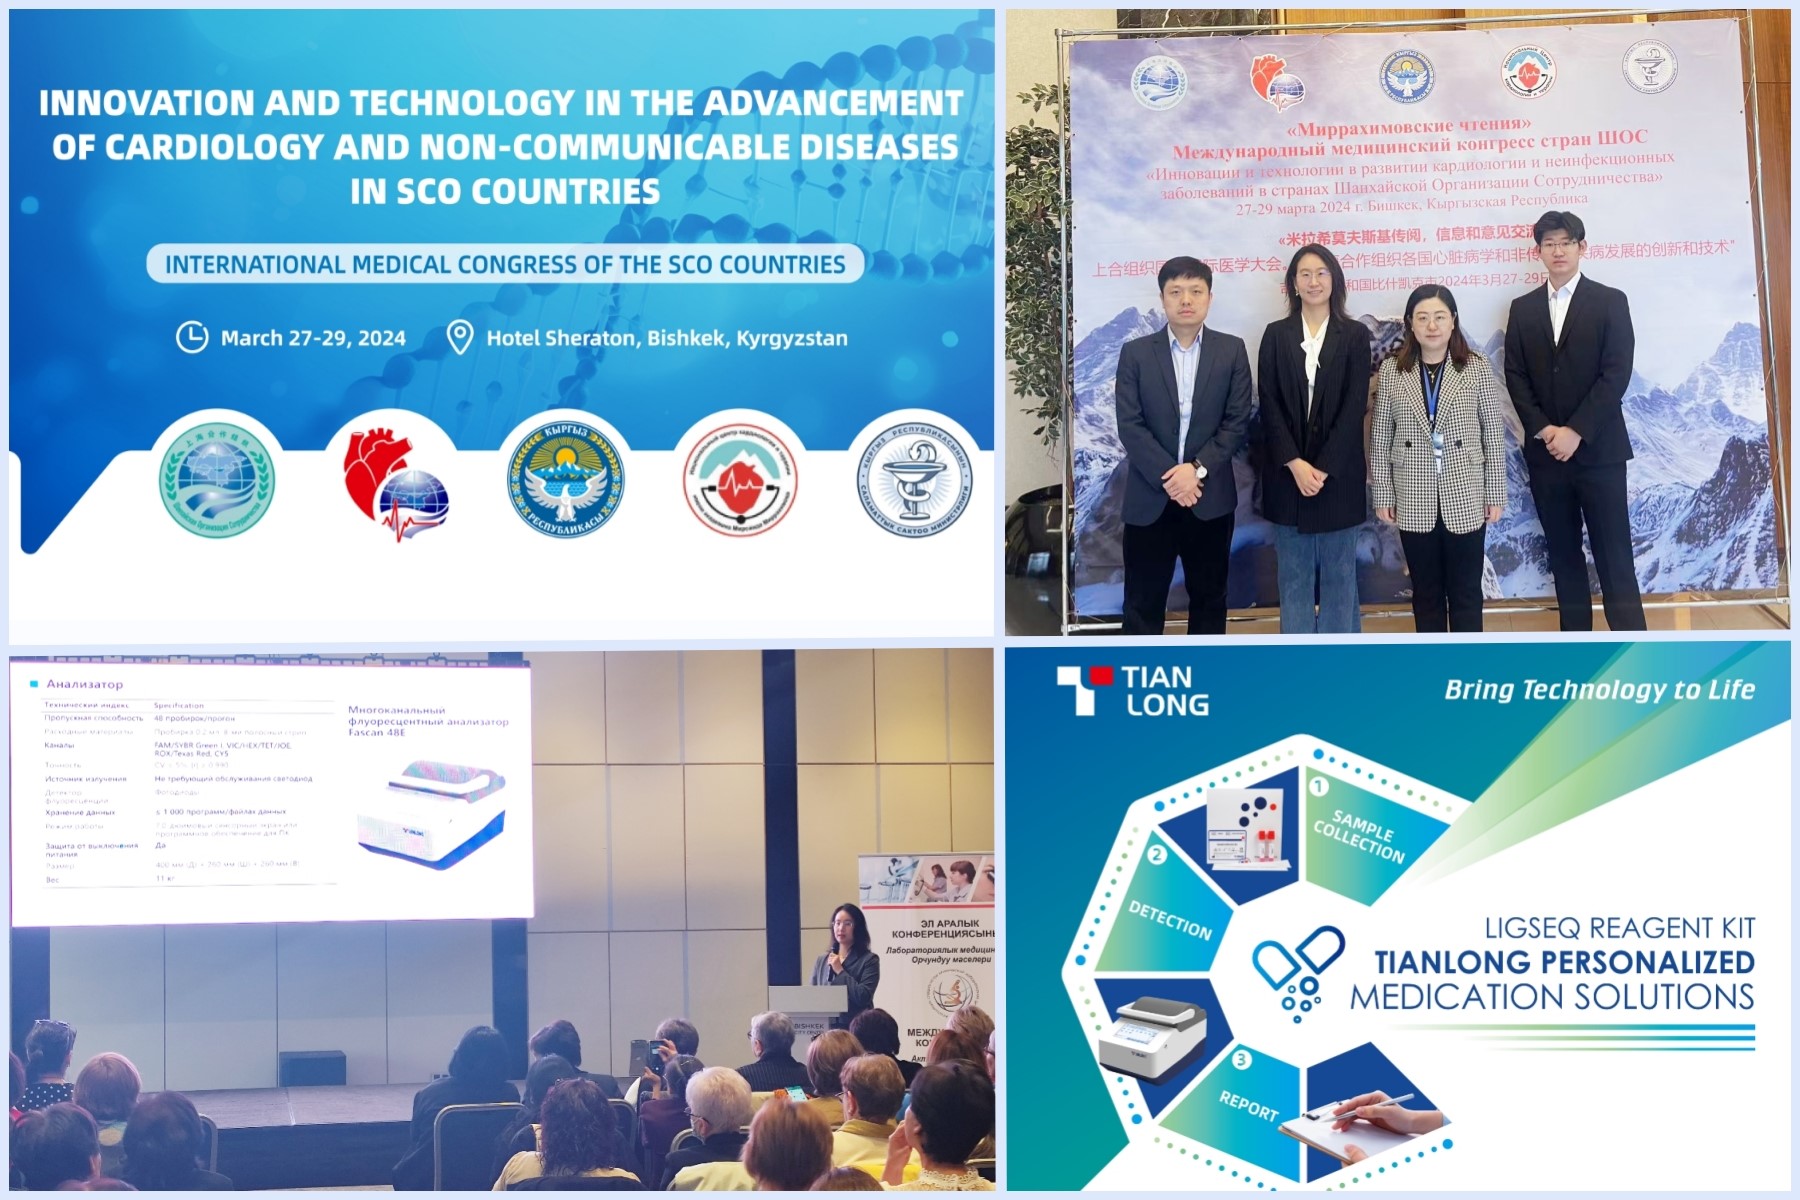 TianLong Participated in the International Medical Congress of SCO Countries in Kyrgyzstan (photo courtesy of Tianlong)